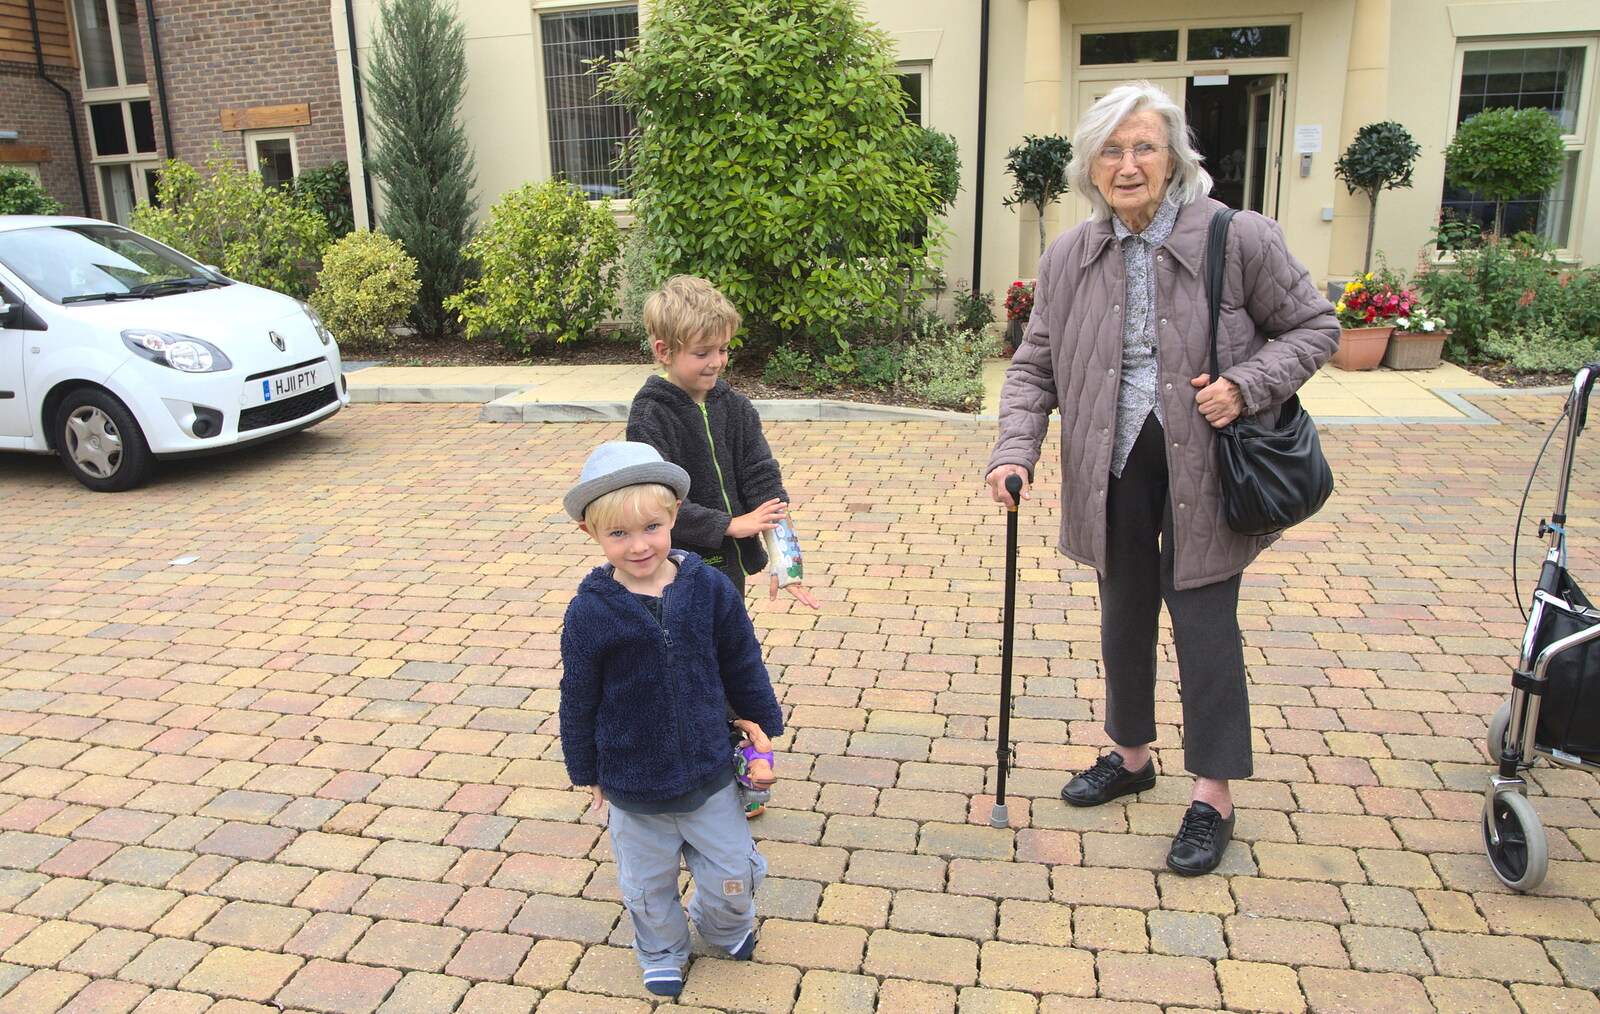 Harry, Fred and Grandmother from Camping at Roundhills, Brockenhurst, New Forest, Hampshire - 29th August 2015